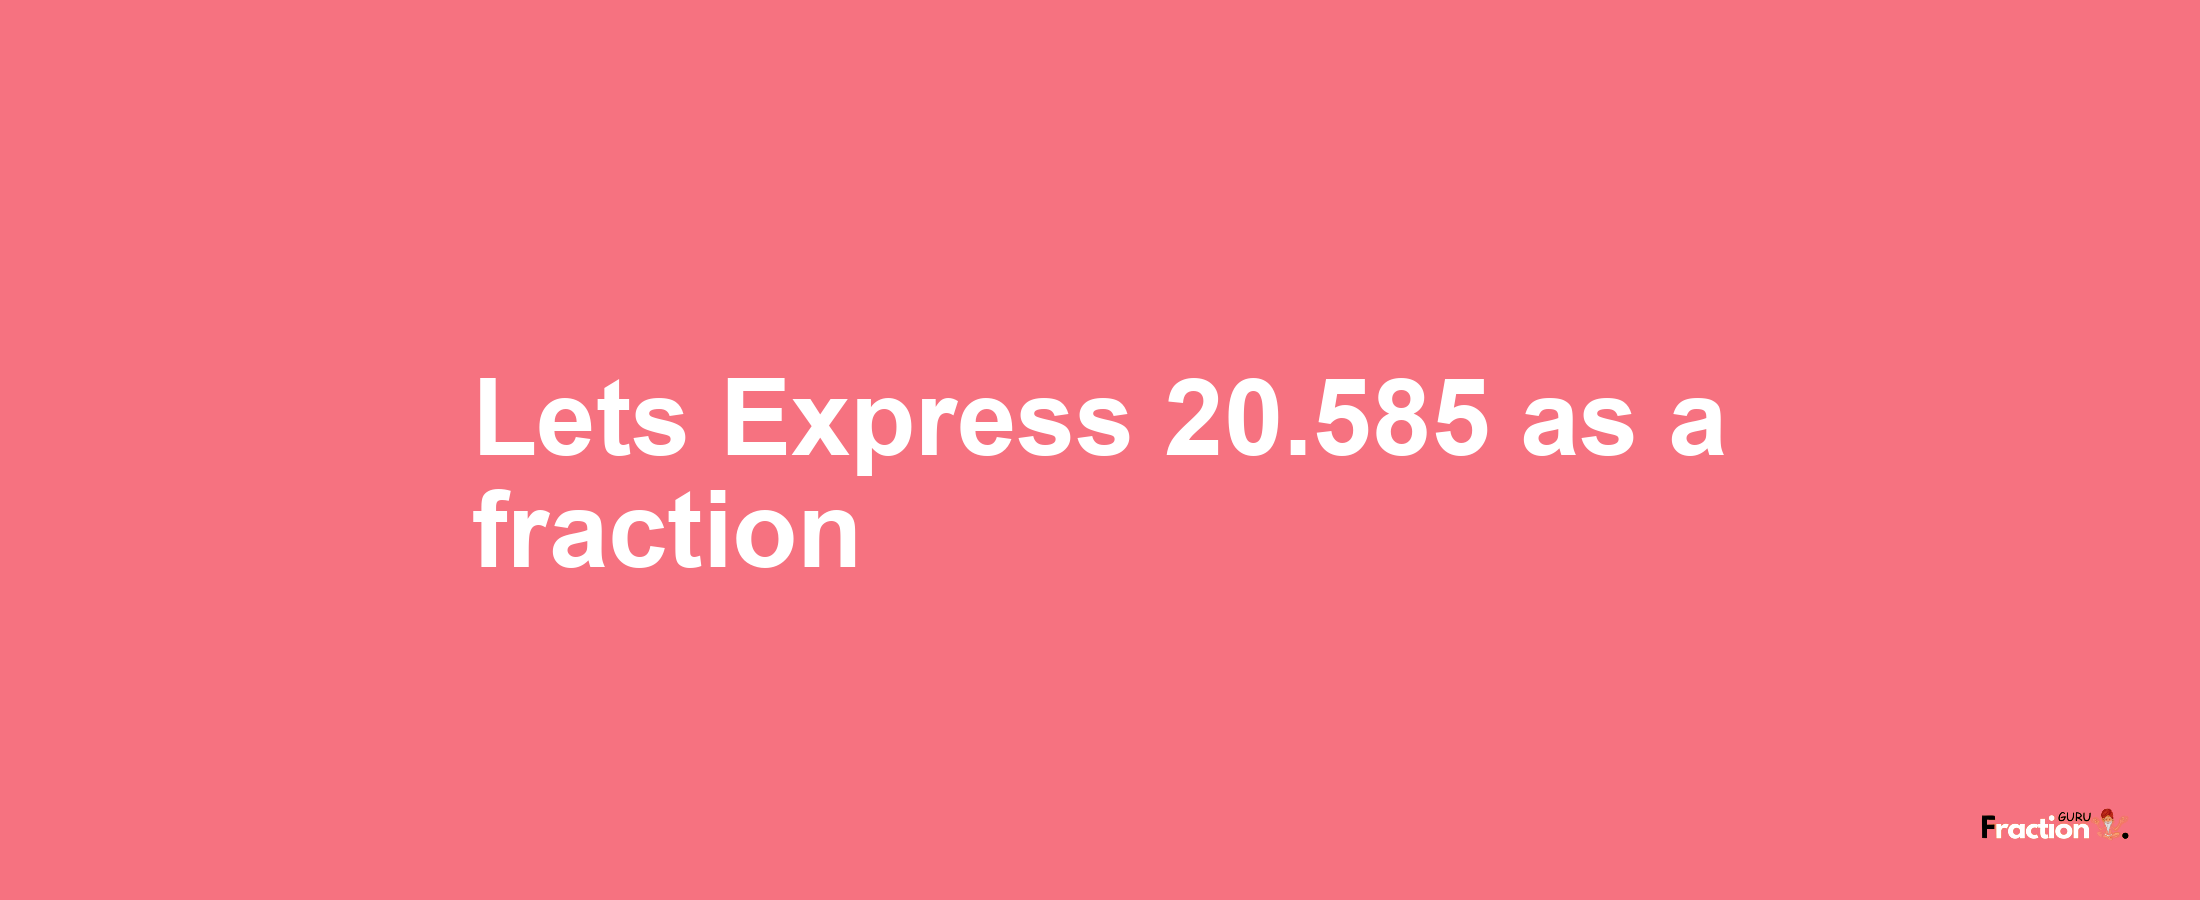 Lets Express 20.585 as afraction